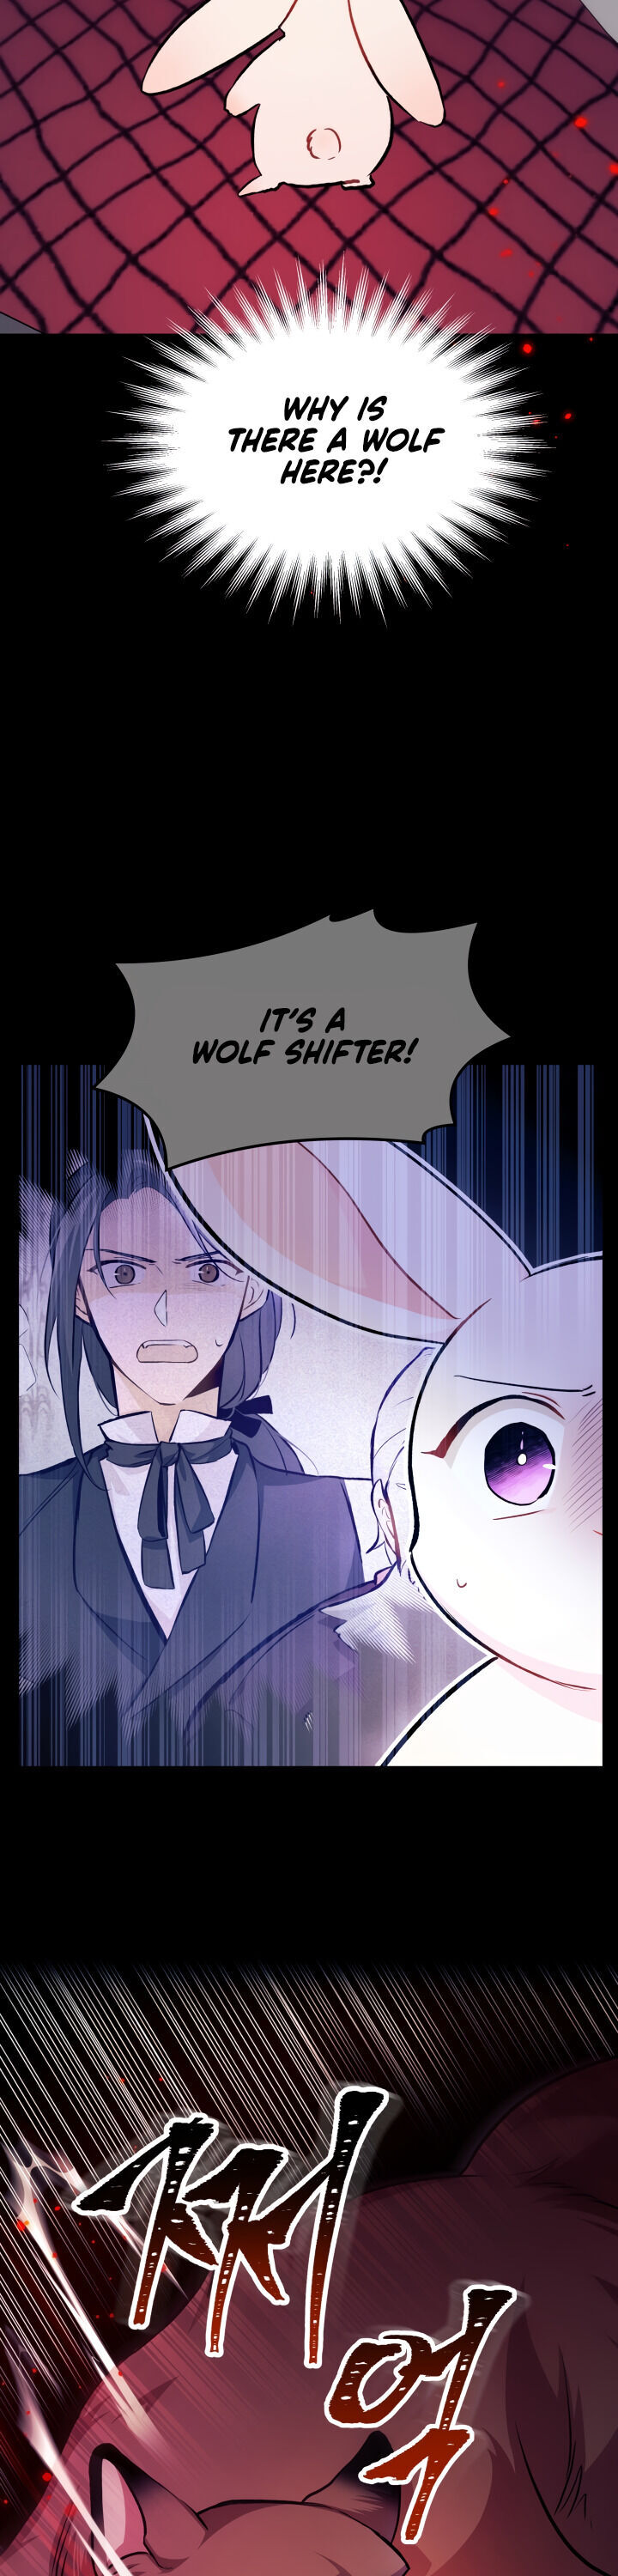 A Symbiotic Relationship Between A Rabbit And A Black Panther - Chapter 14 Page 2